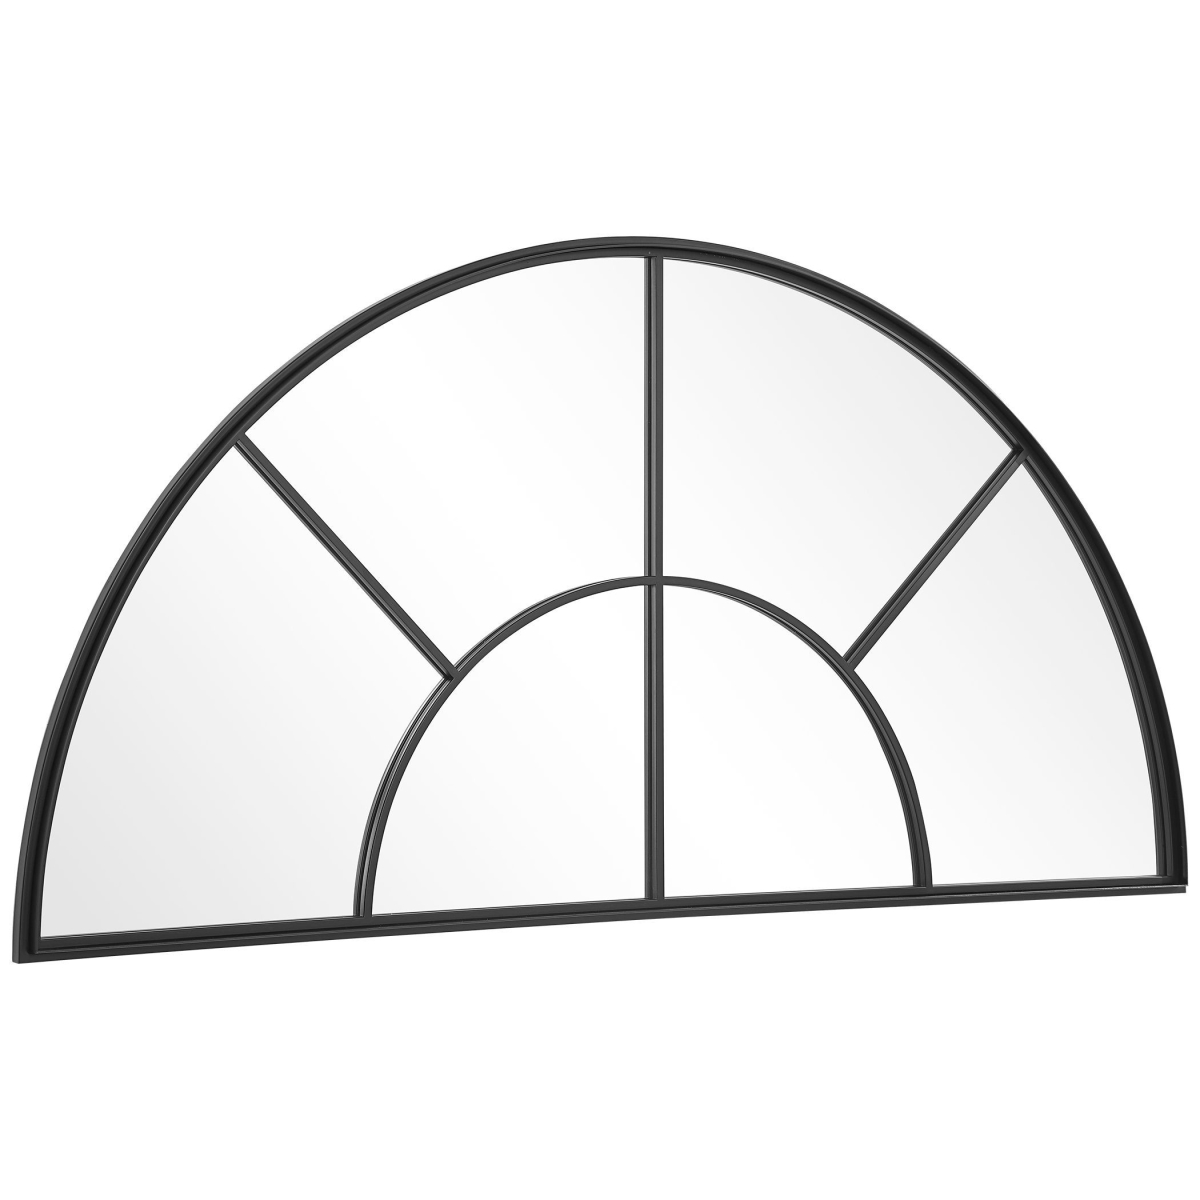 Picture of 212 Main 09733 Rousseau Iron Window Arch Mirror